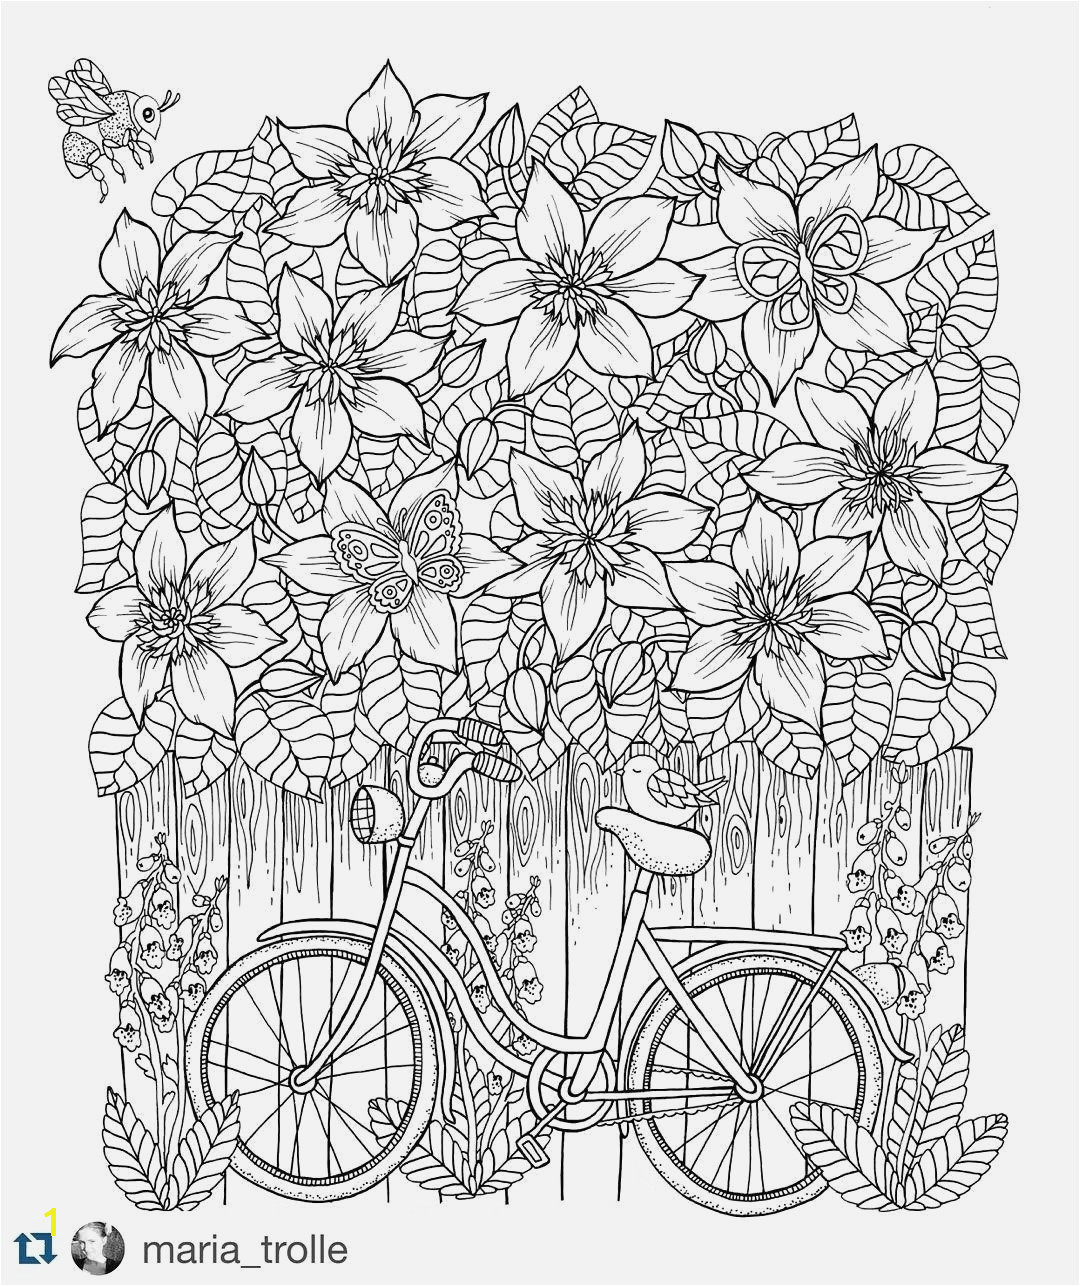 Fall Coloring Pages for Adults Easy Adult Coloring Pages Printable Simple Adult Coloring Pages Best